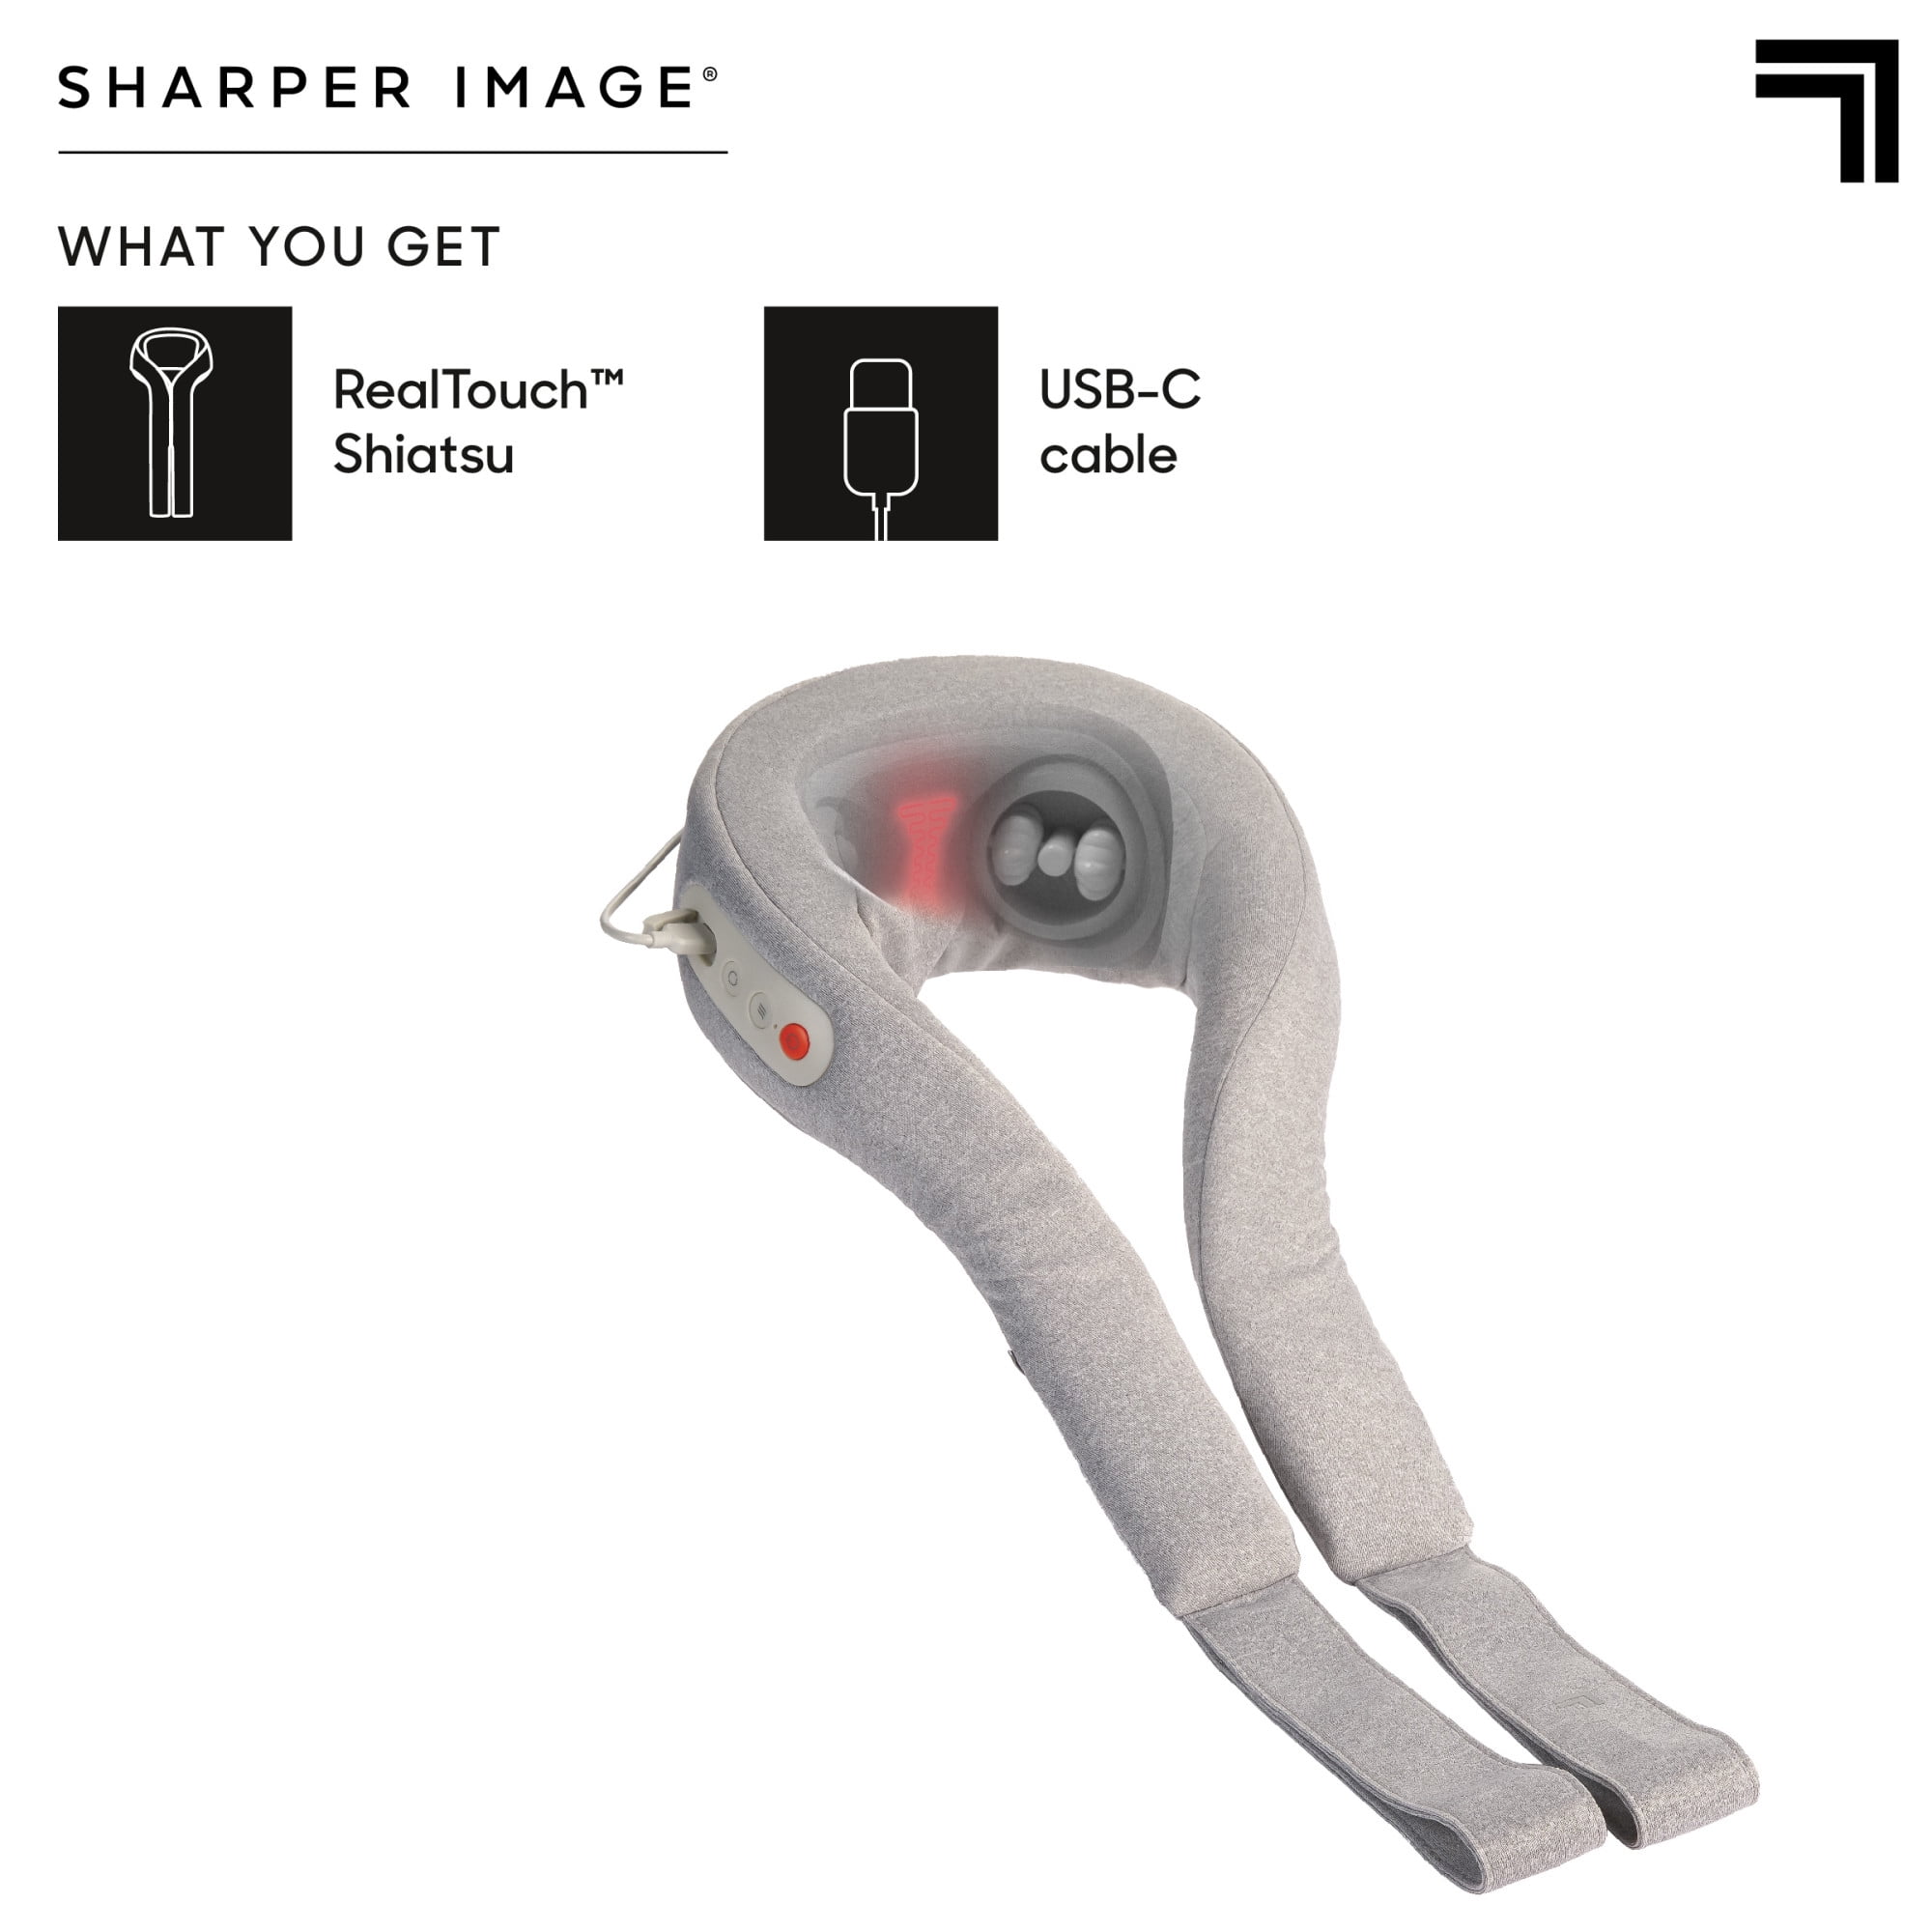 Sharper Image® Neck Tens Muscle Stimulator with Soothing Heat & Wireless  Remote, Pain Relief Therapy With 3 Massage Modes & 15 Intensity Levels, USB  Rechargeable, 4 Hour Battery Life 